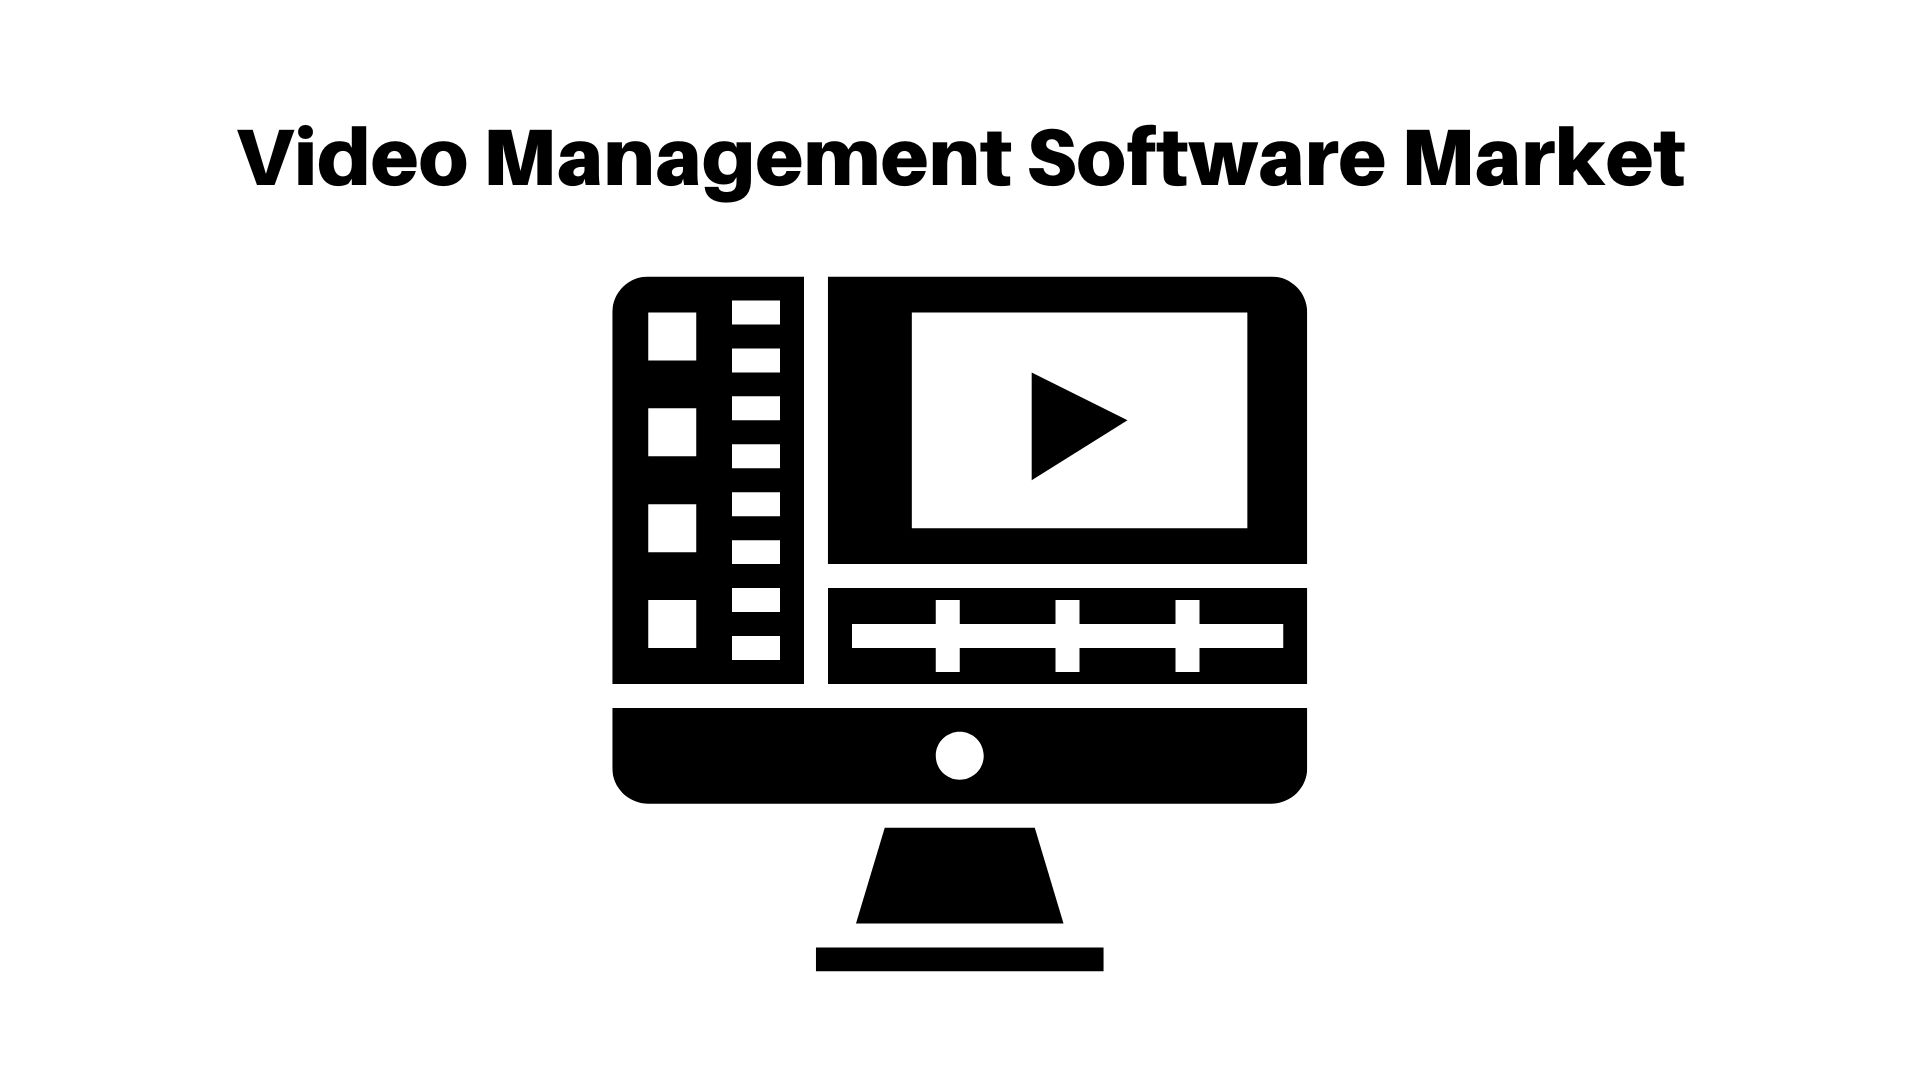 Video Management Software Market is poised to grow at a CAGR of 10.2% by 2032